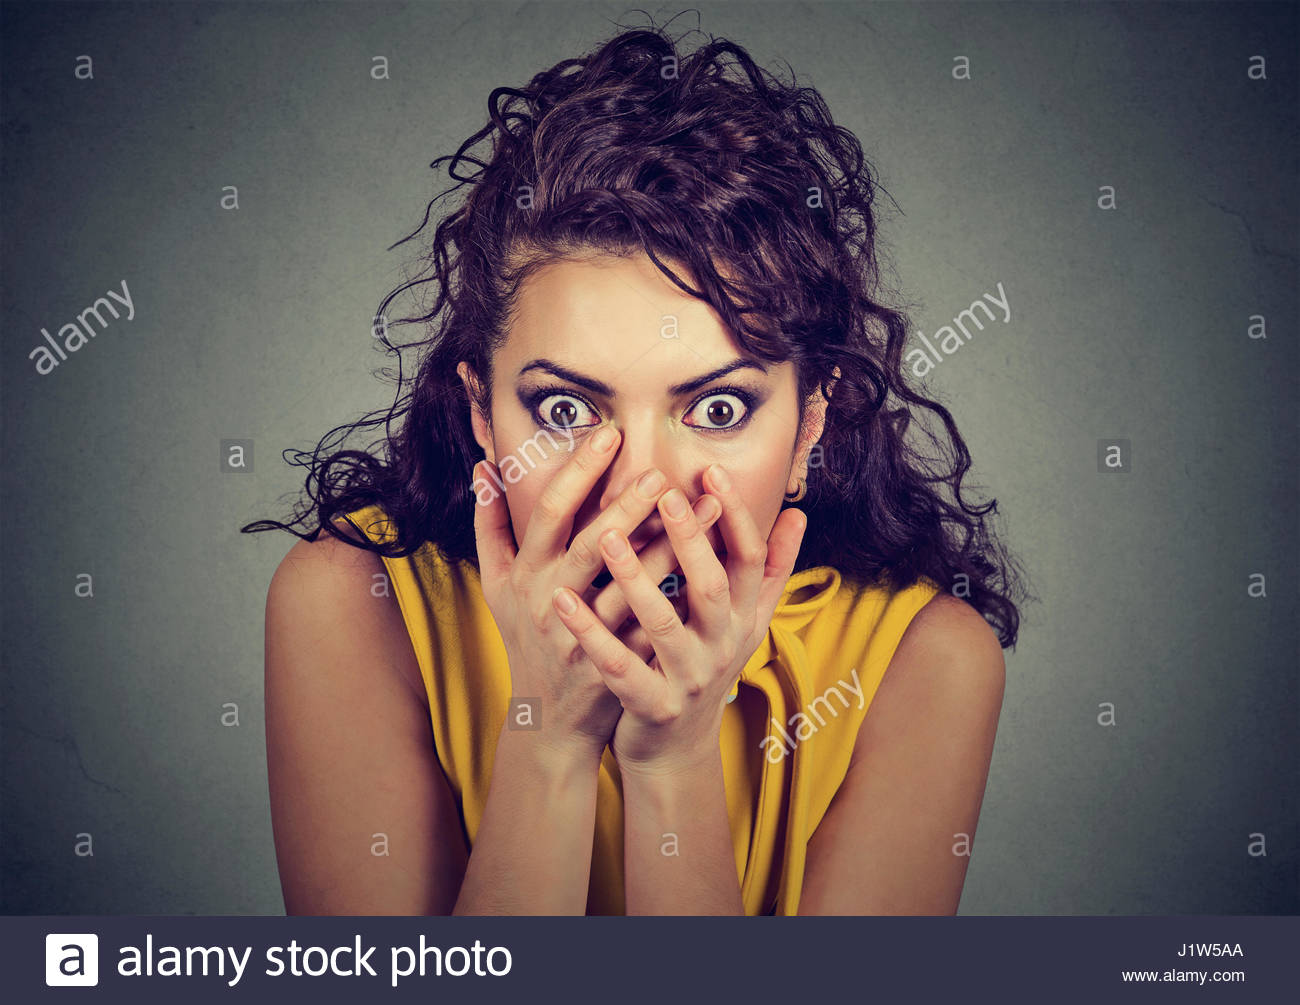 Scared Shocked Woman With Hands Over Her Mouth Isolated On Gray